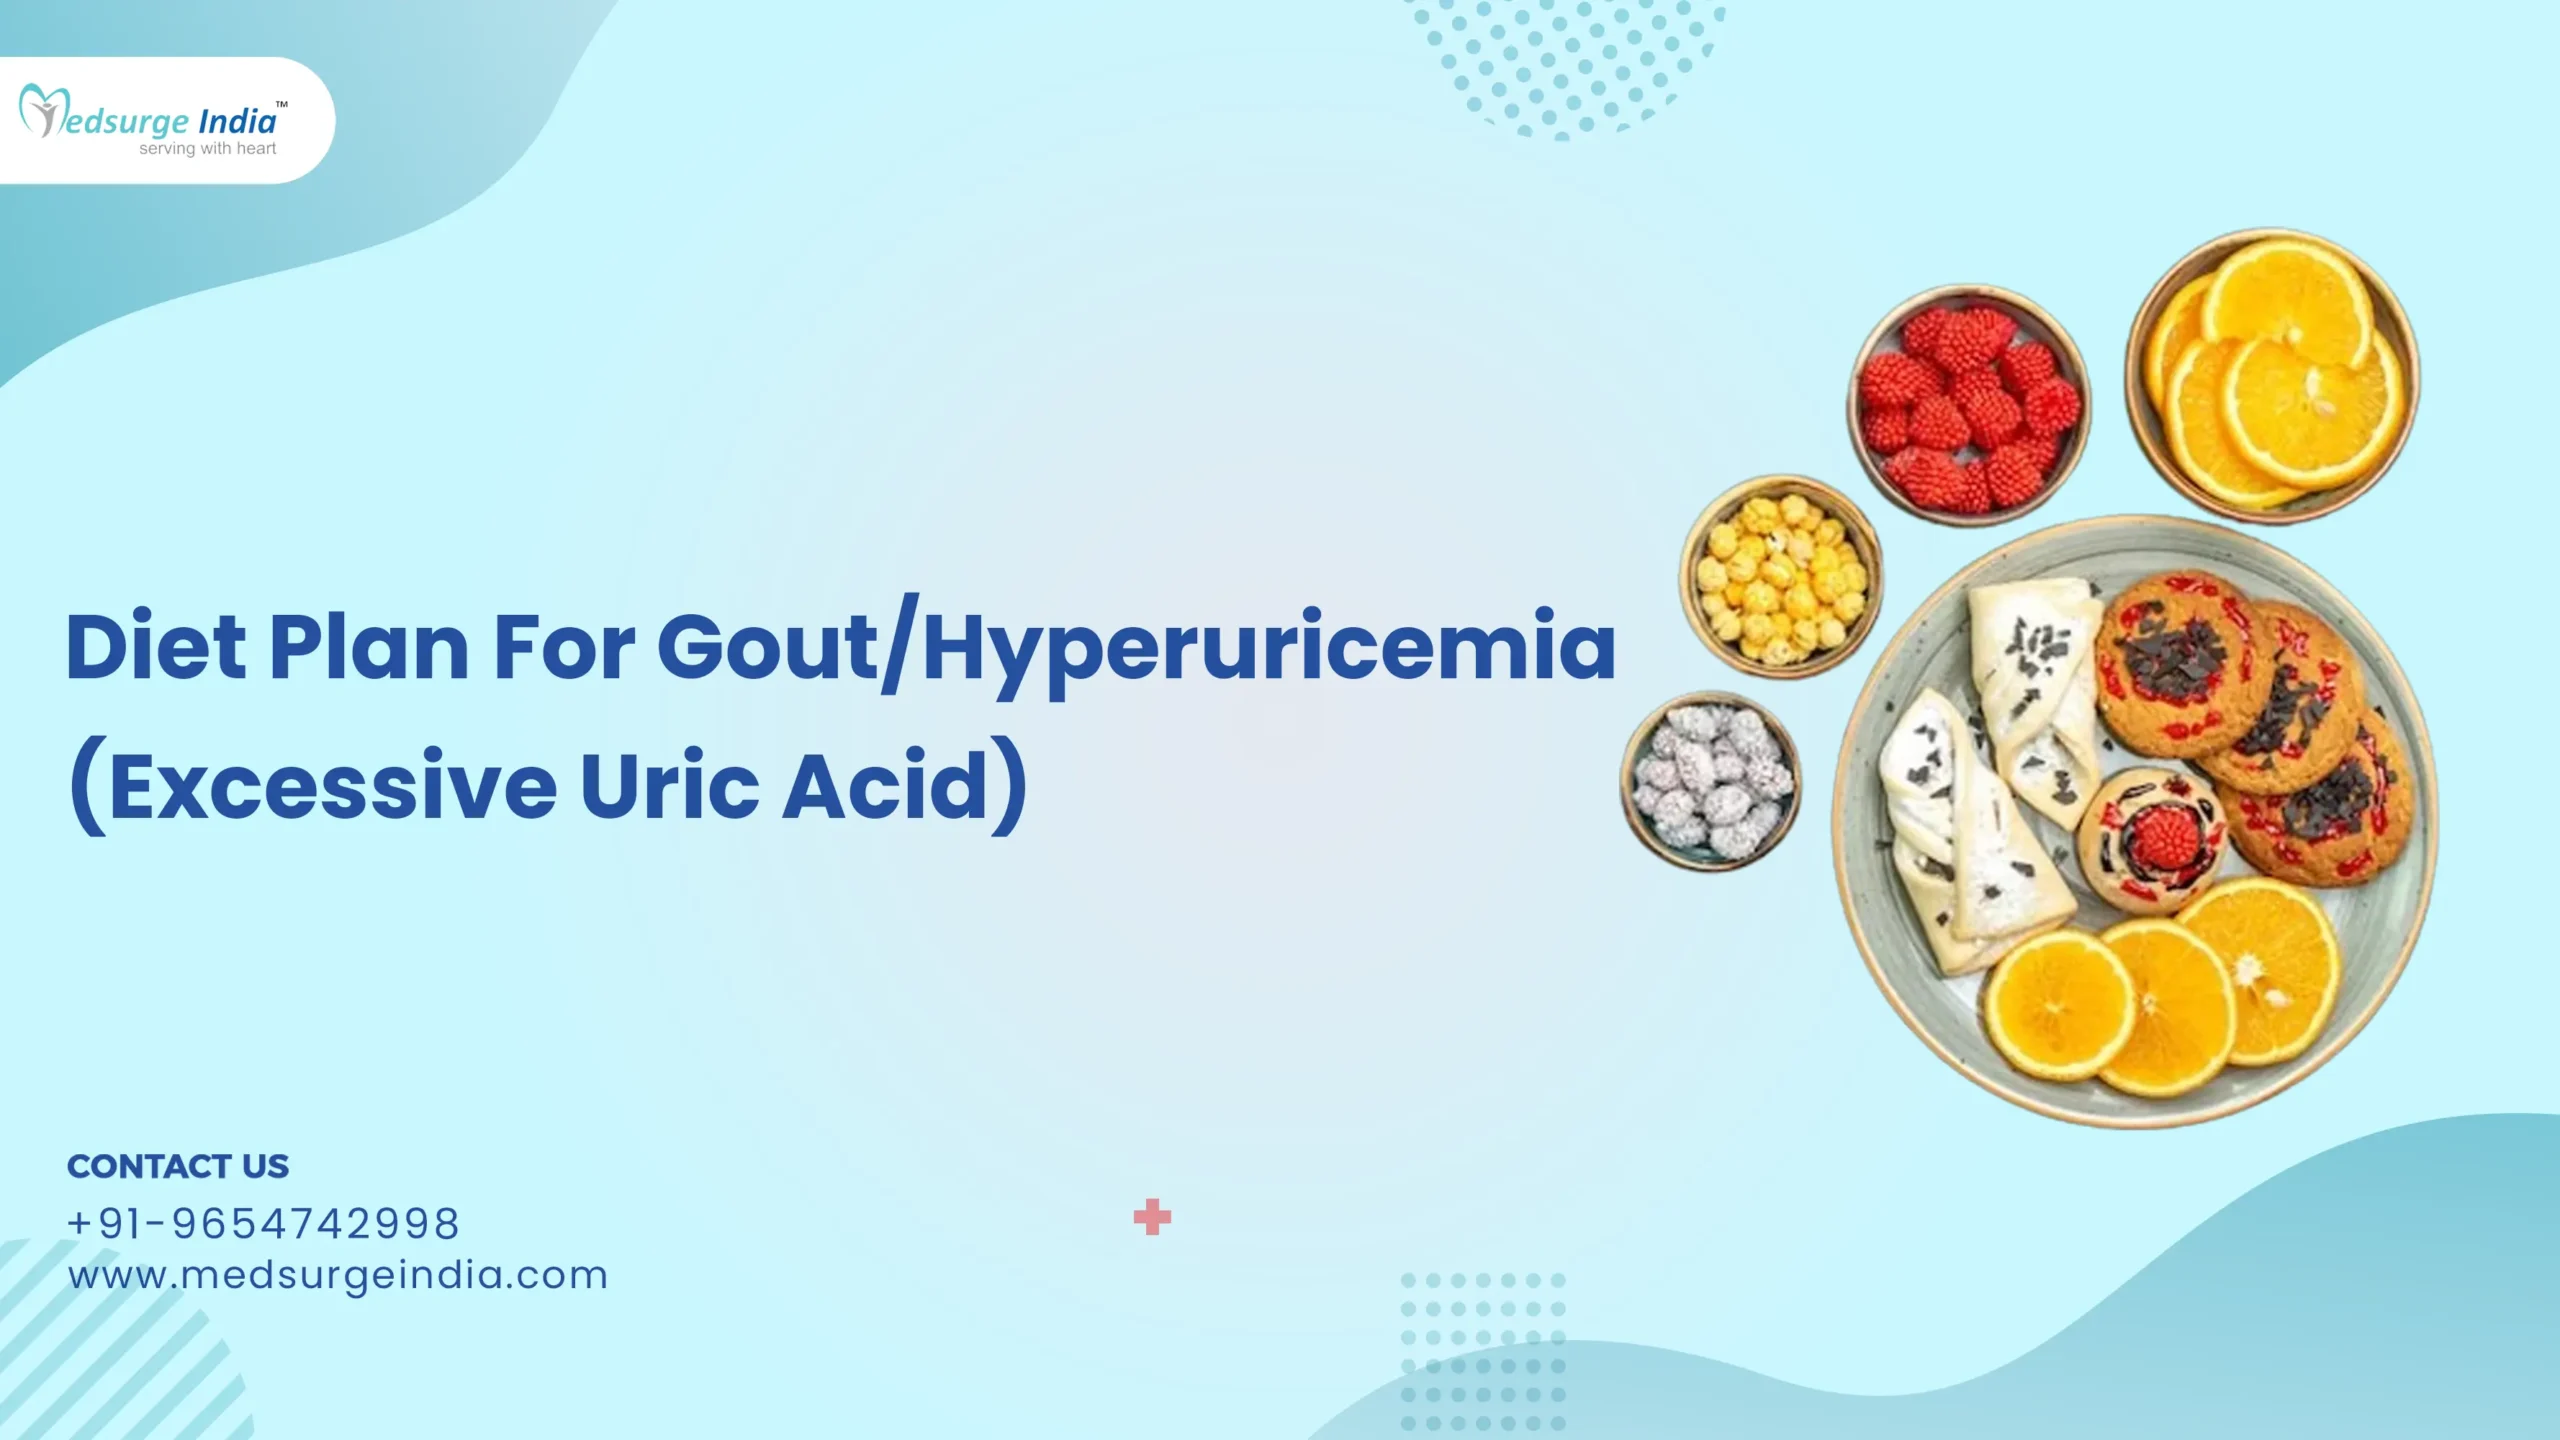 Diet Plan For Gout/Hyperuricemia (Excessive Uric Acid)